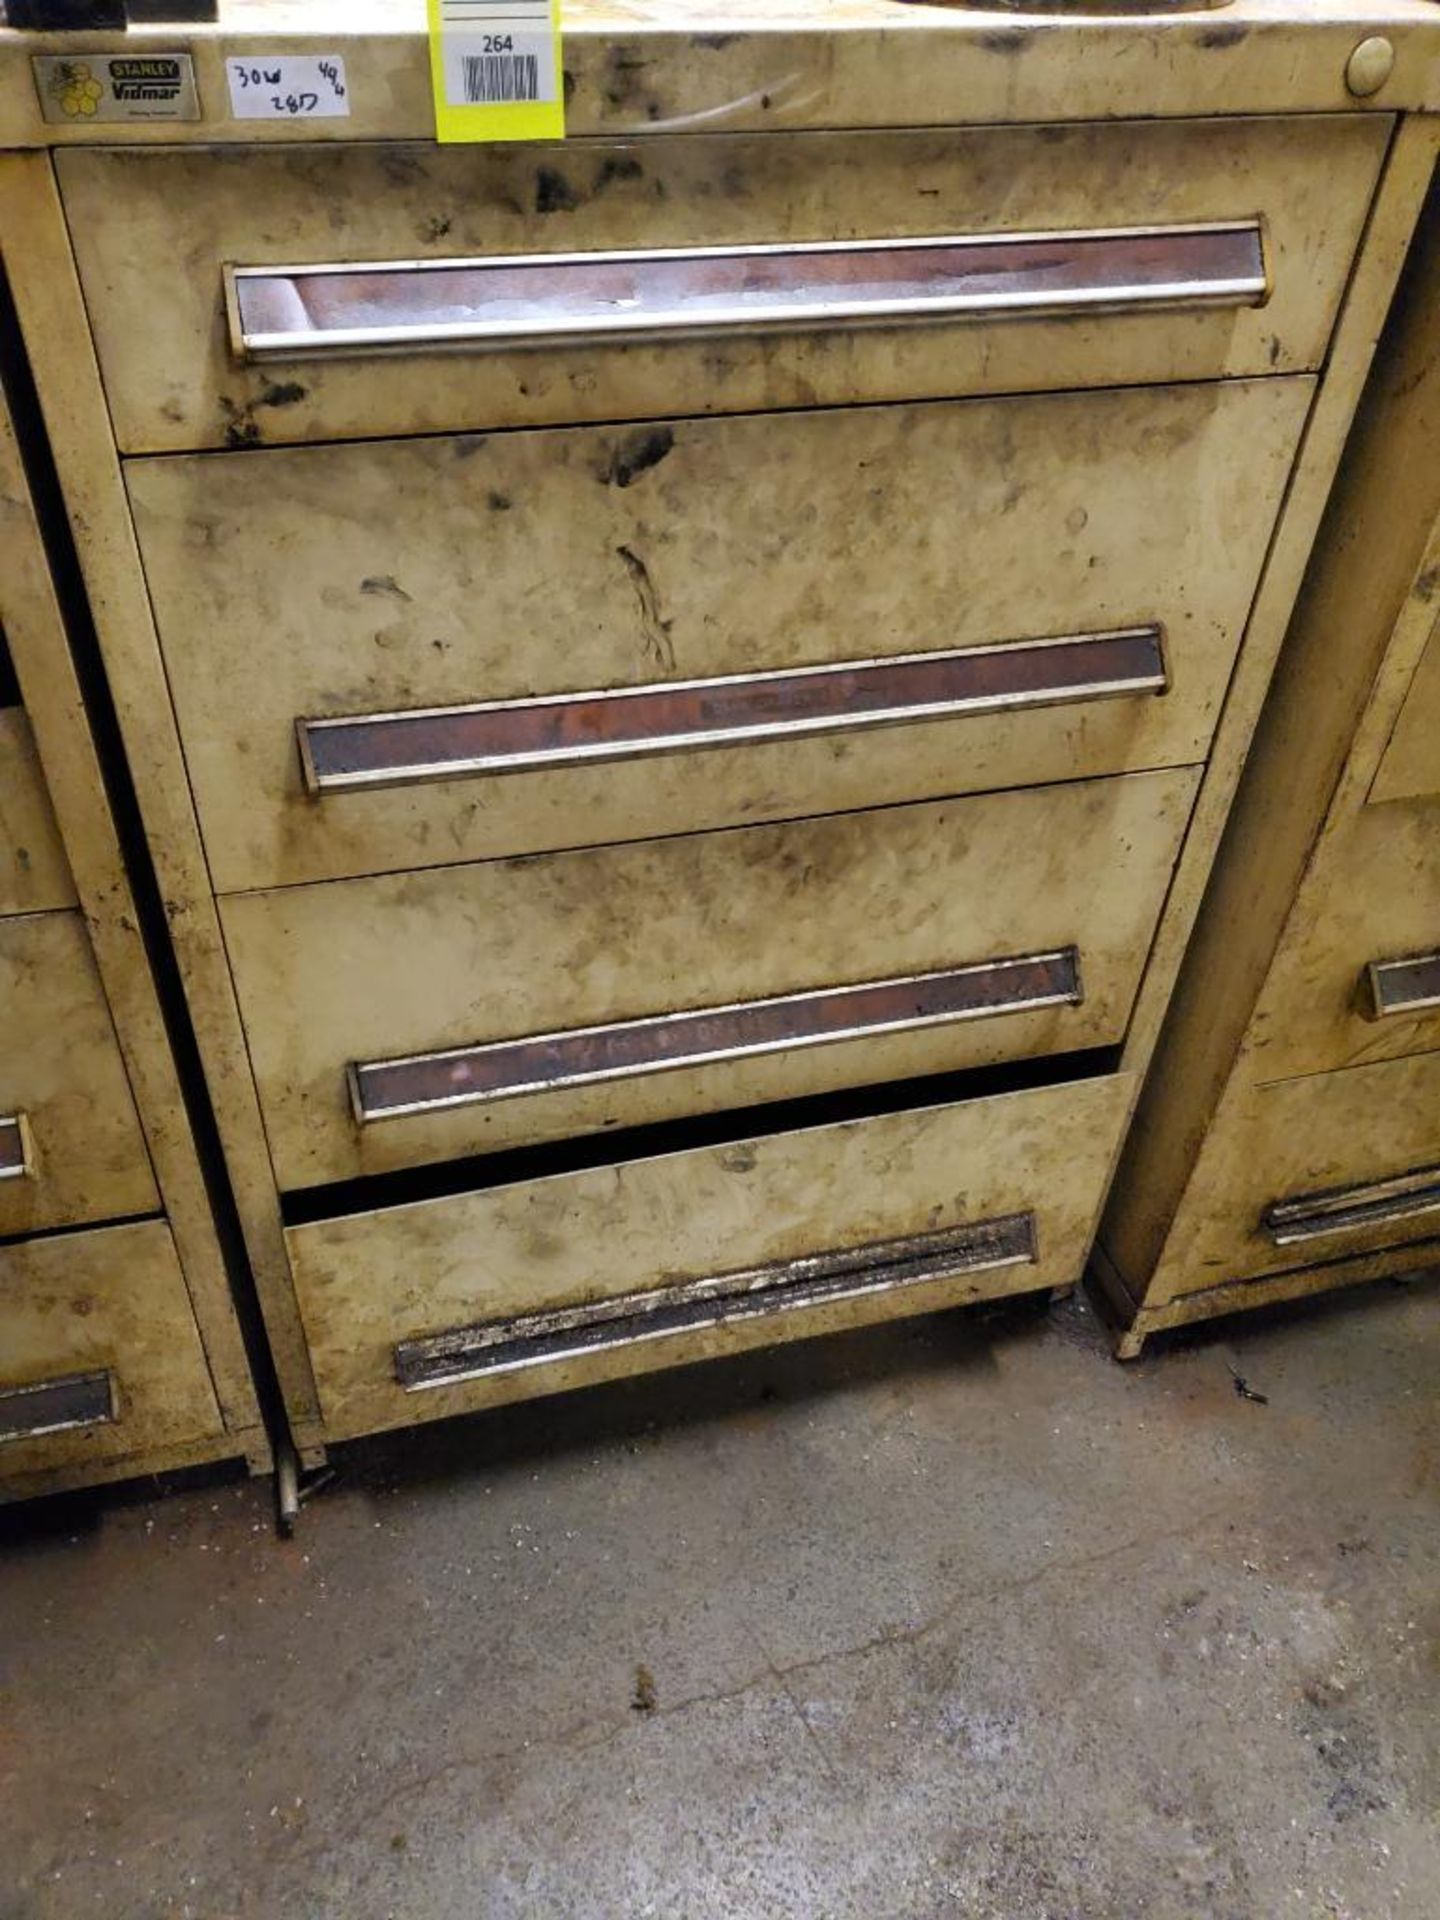 4 drawer Stanley Vidmar 44 tall x 30w x 28d. Contents not included.